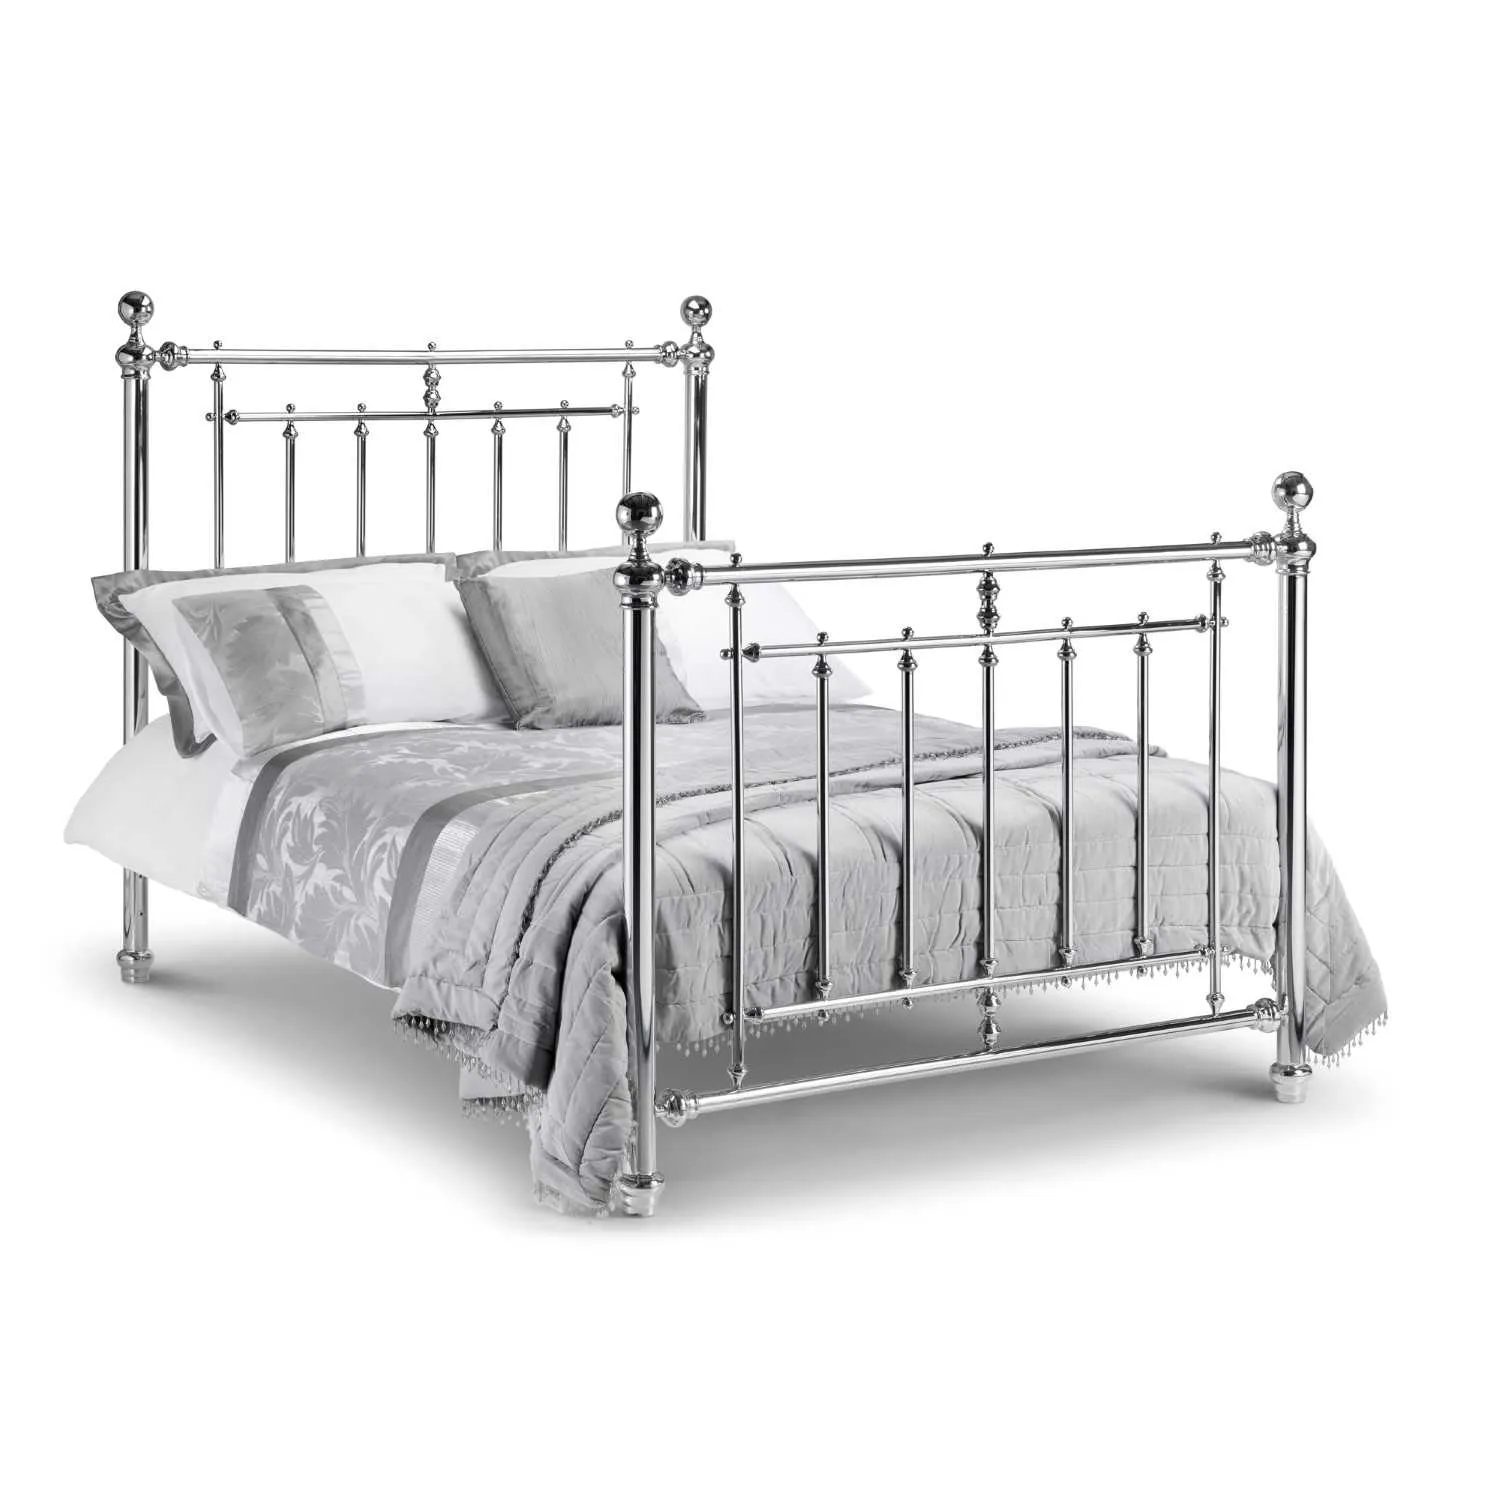 Chrome Plated Finish Metal Bed Frame 150cm 5ft King Size High Foot End Traditional